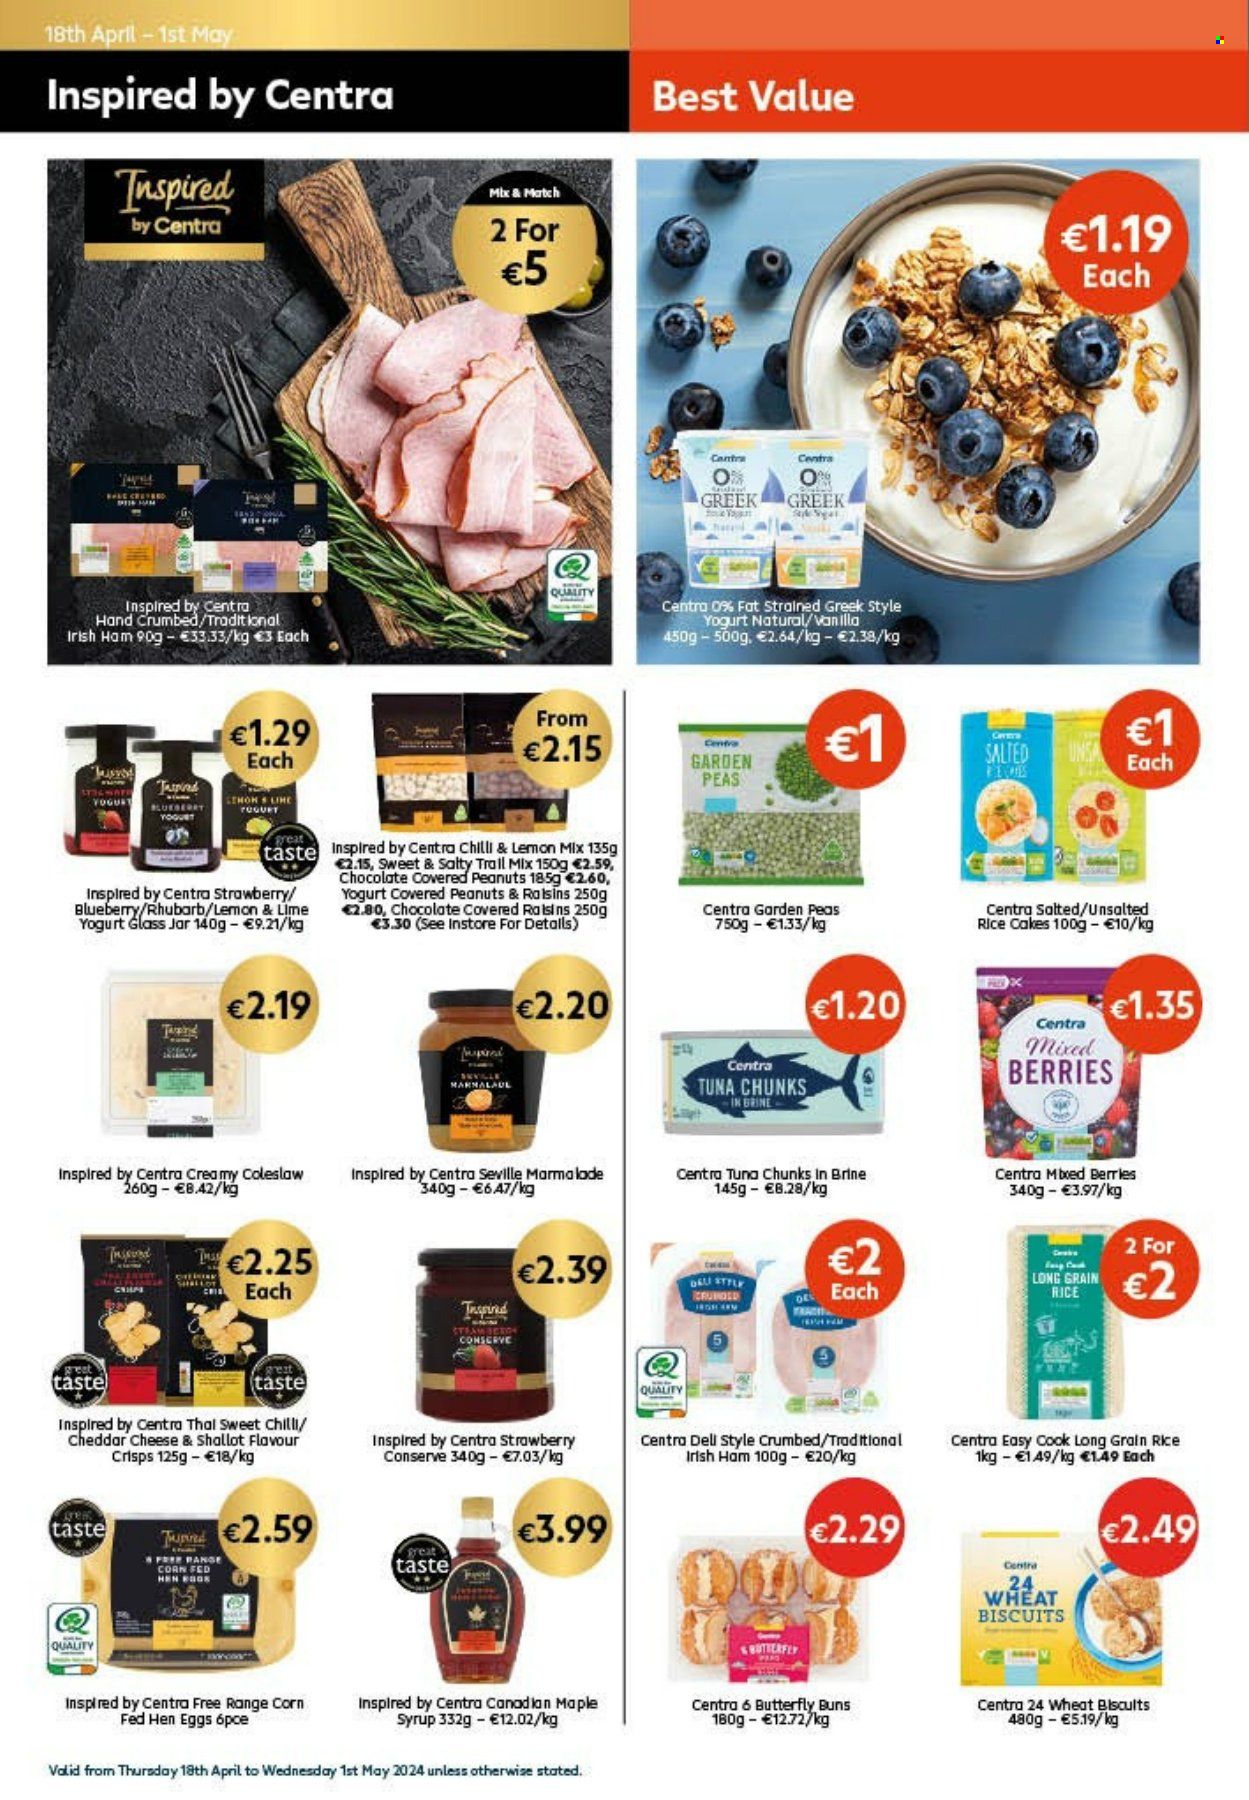 thumbnail - Centra offer  - 18.04.2024 - 01.05.2024 - Sales products - buns, rice cakes, coleslaw, rhubarb, peas, tuna, ham, cheddar, greek yoghurt, yoghurt, biscuit, crisps, strawberry jam, tuna in brine, long grain rice, maple syrup, fruit jam, syrup, marmalade, peanuts, dried fruit, trail mix, jar, eggs. Page 6.